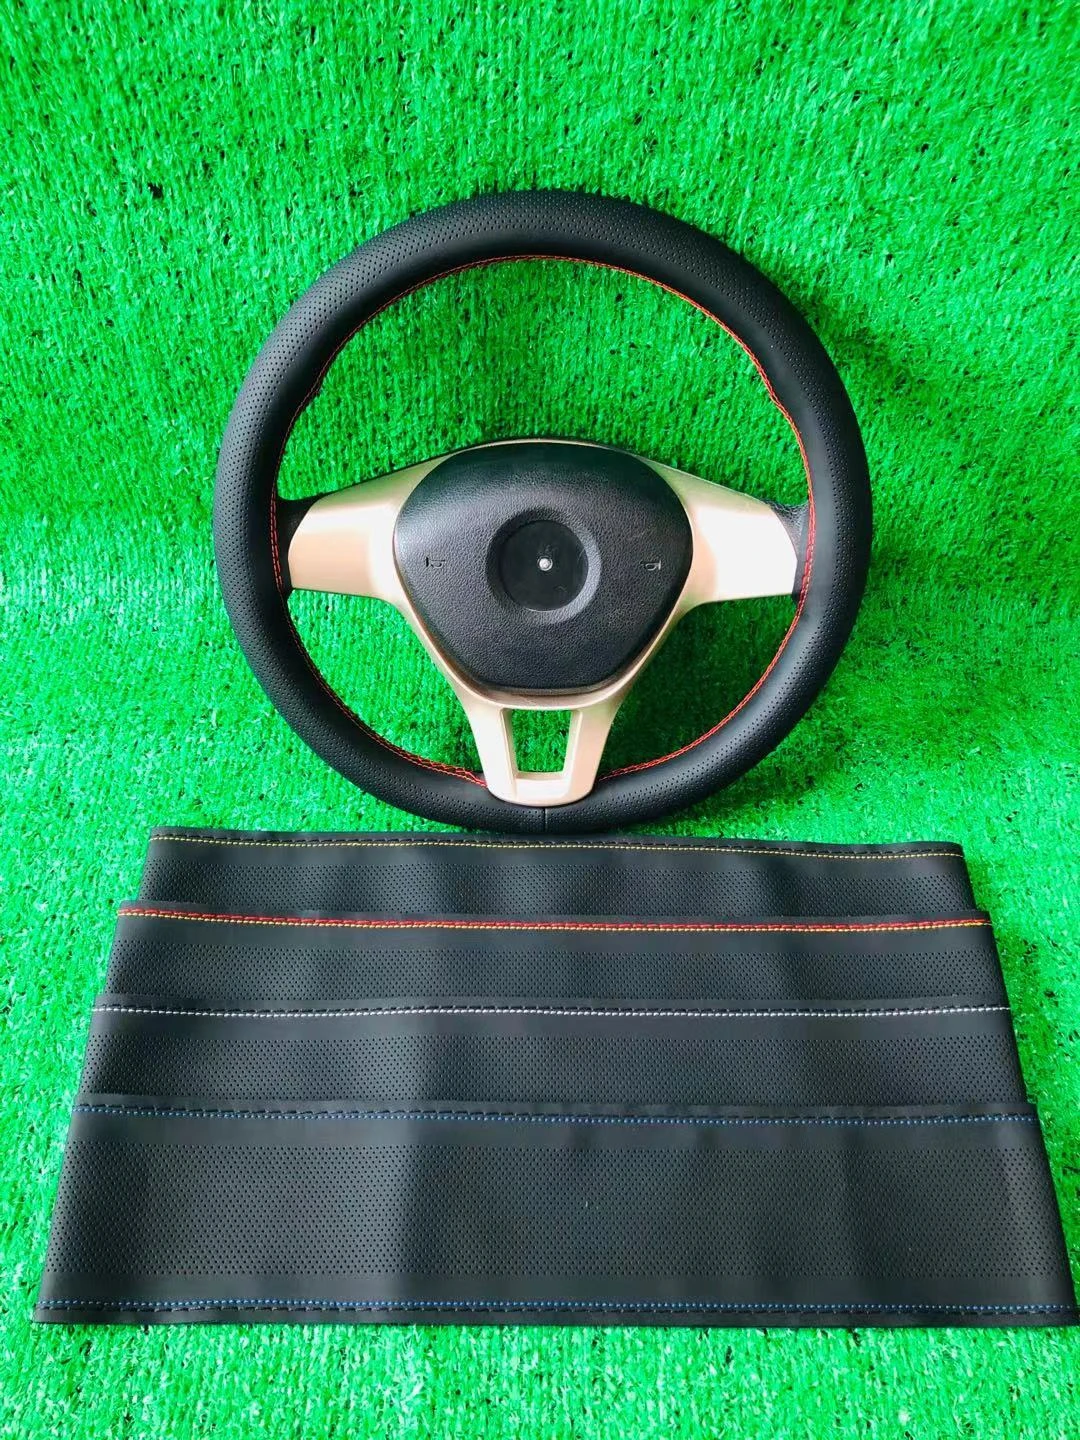 The Steering Wheel Cover Of A Warm Artificial Wool Car Steering Wheel Cover